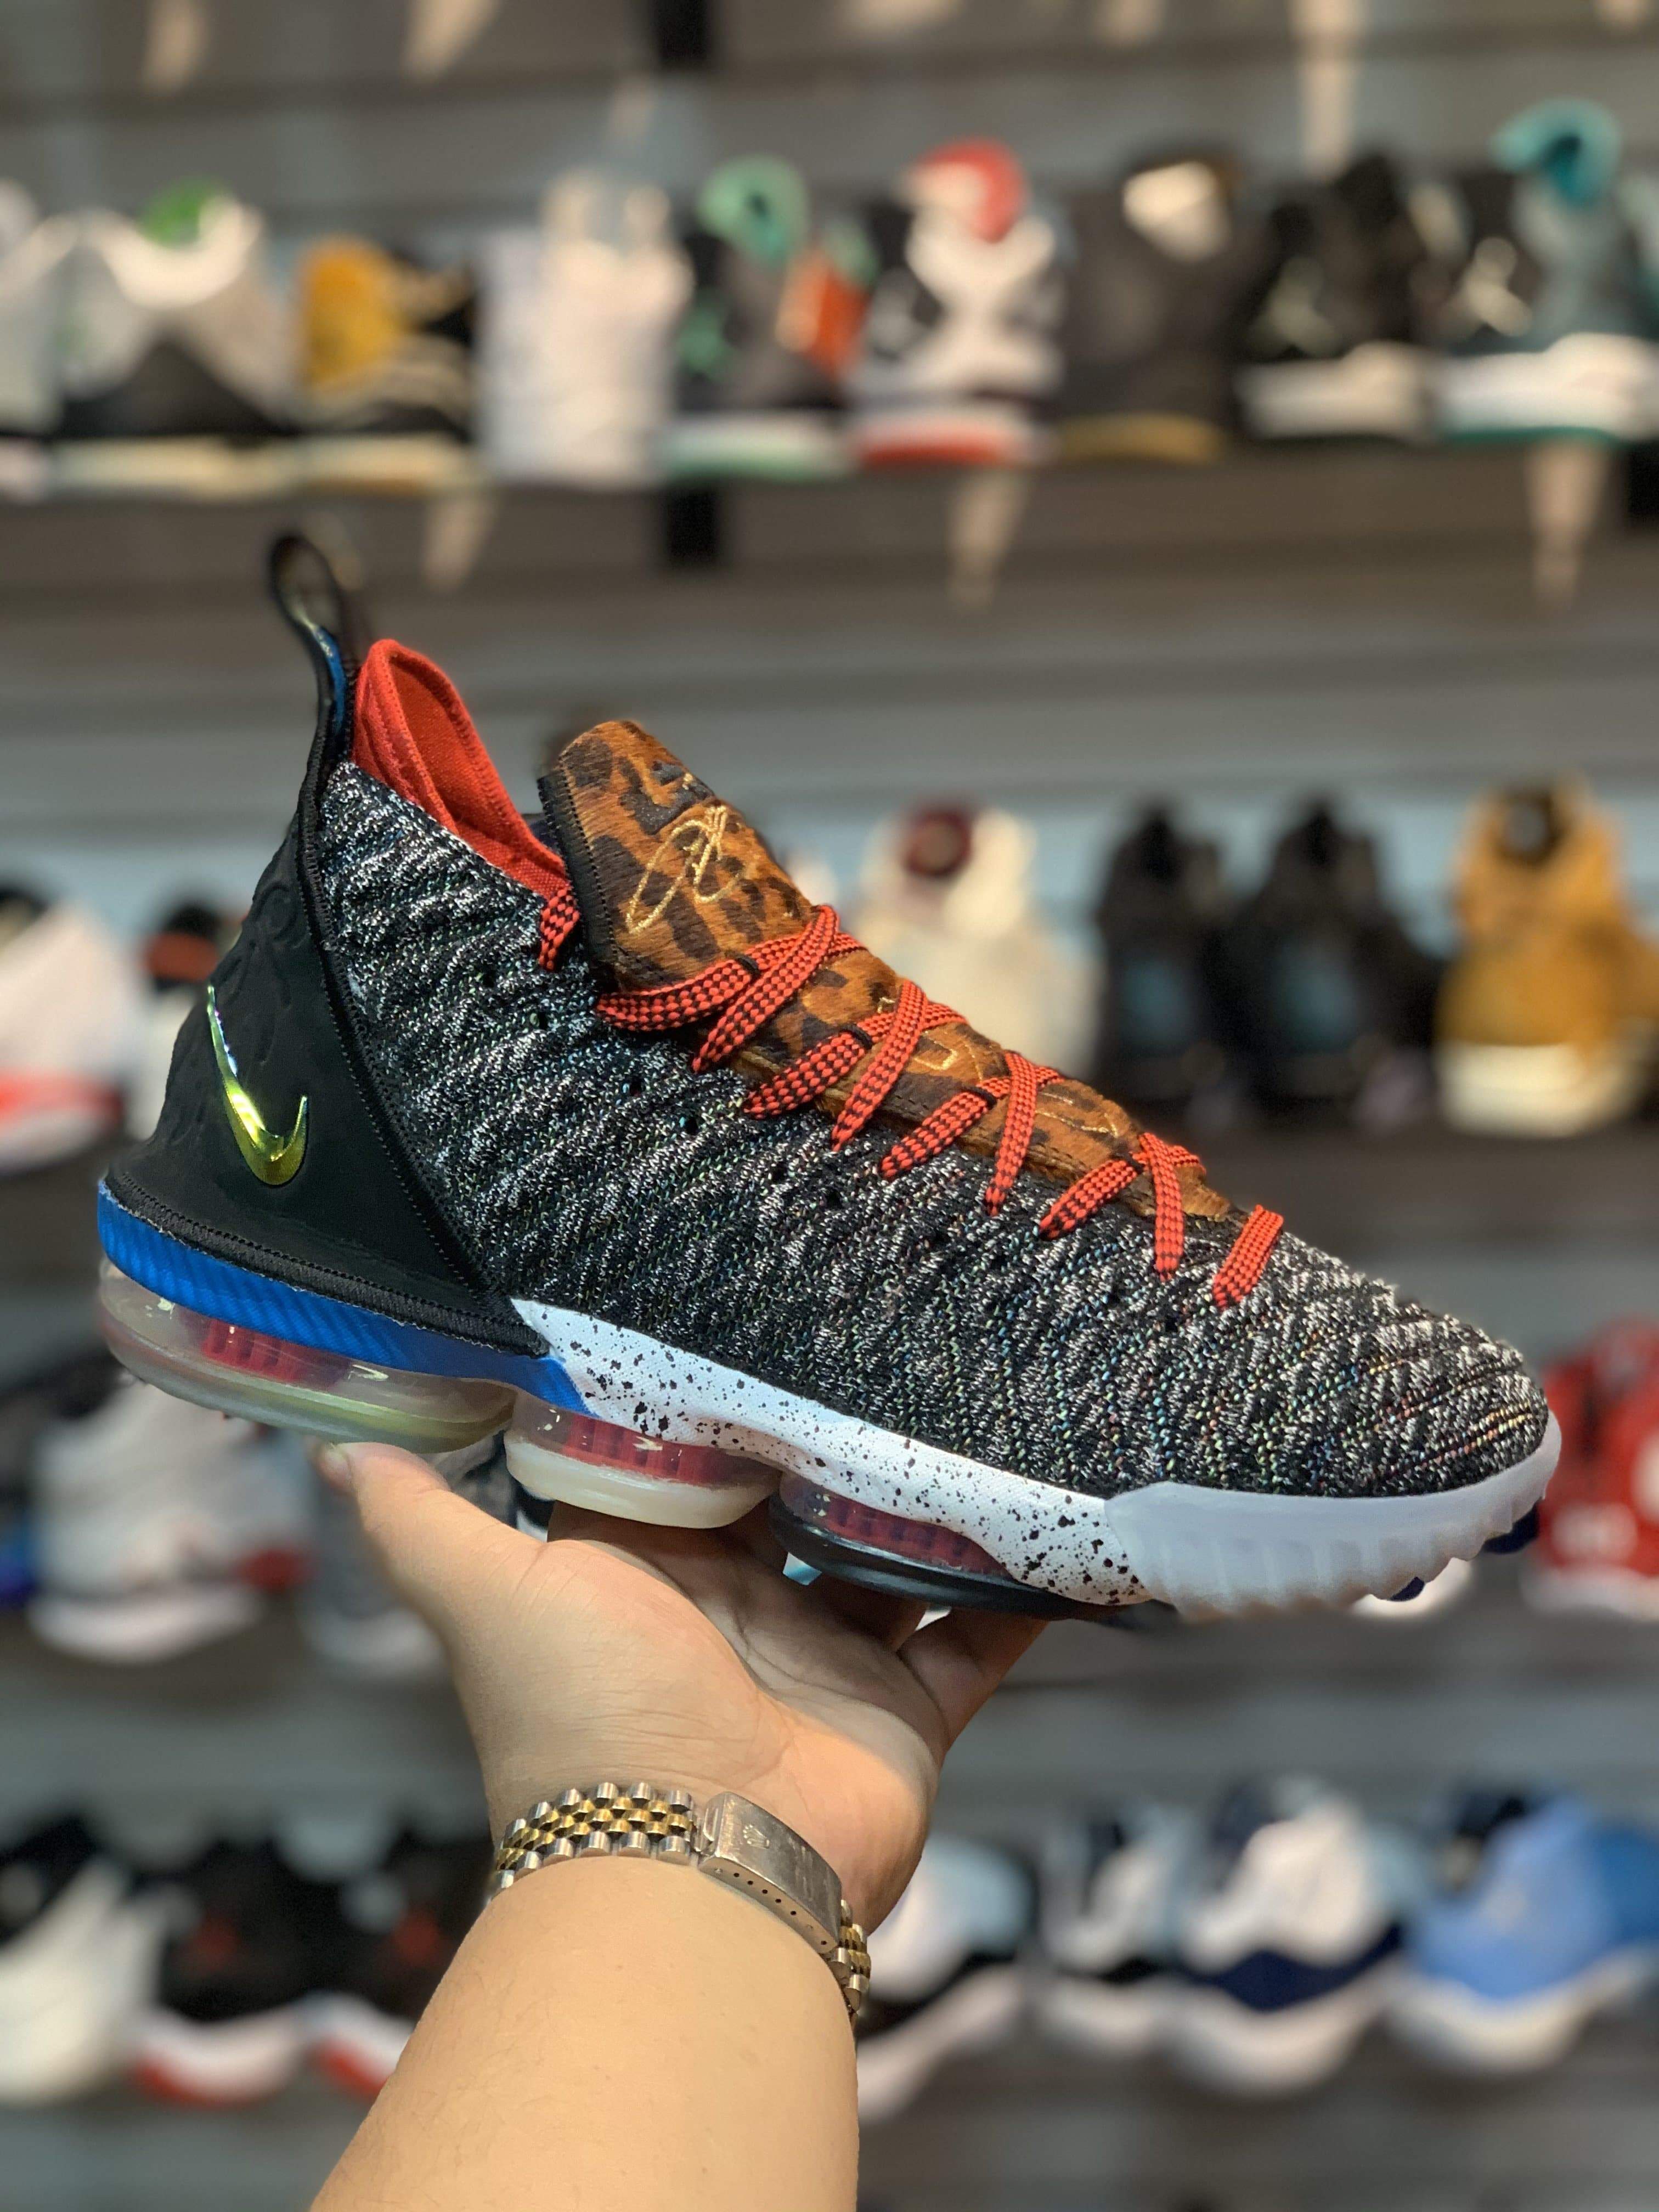 LeBron 16 “What The”